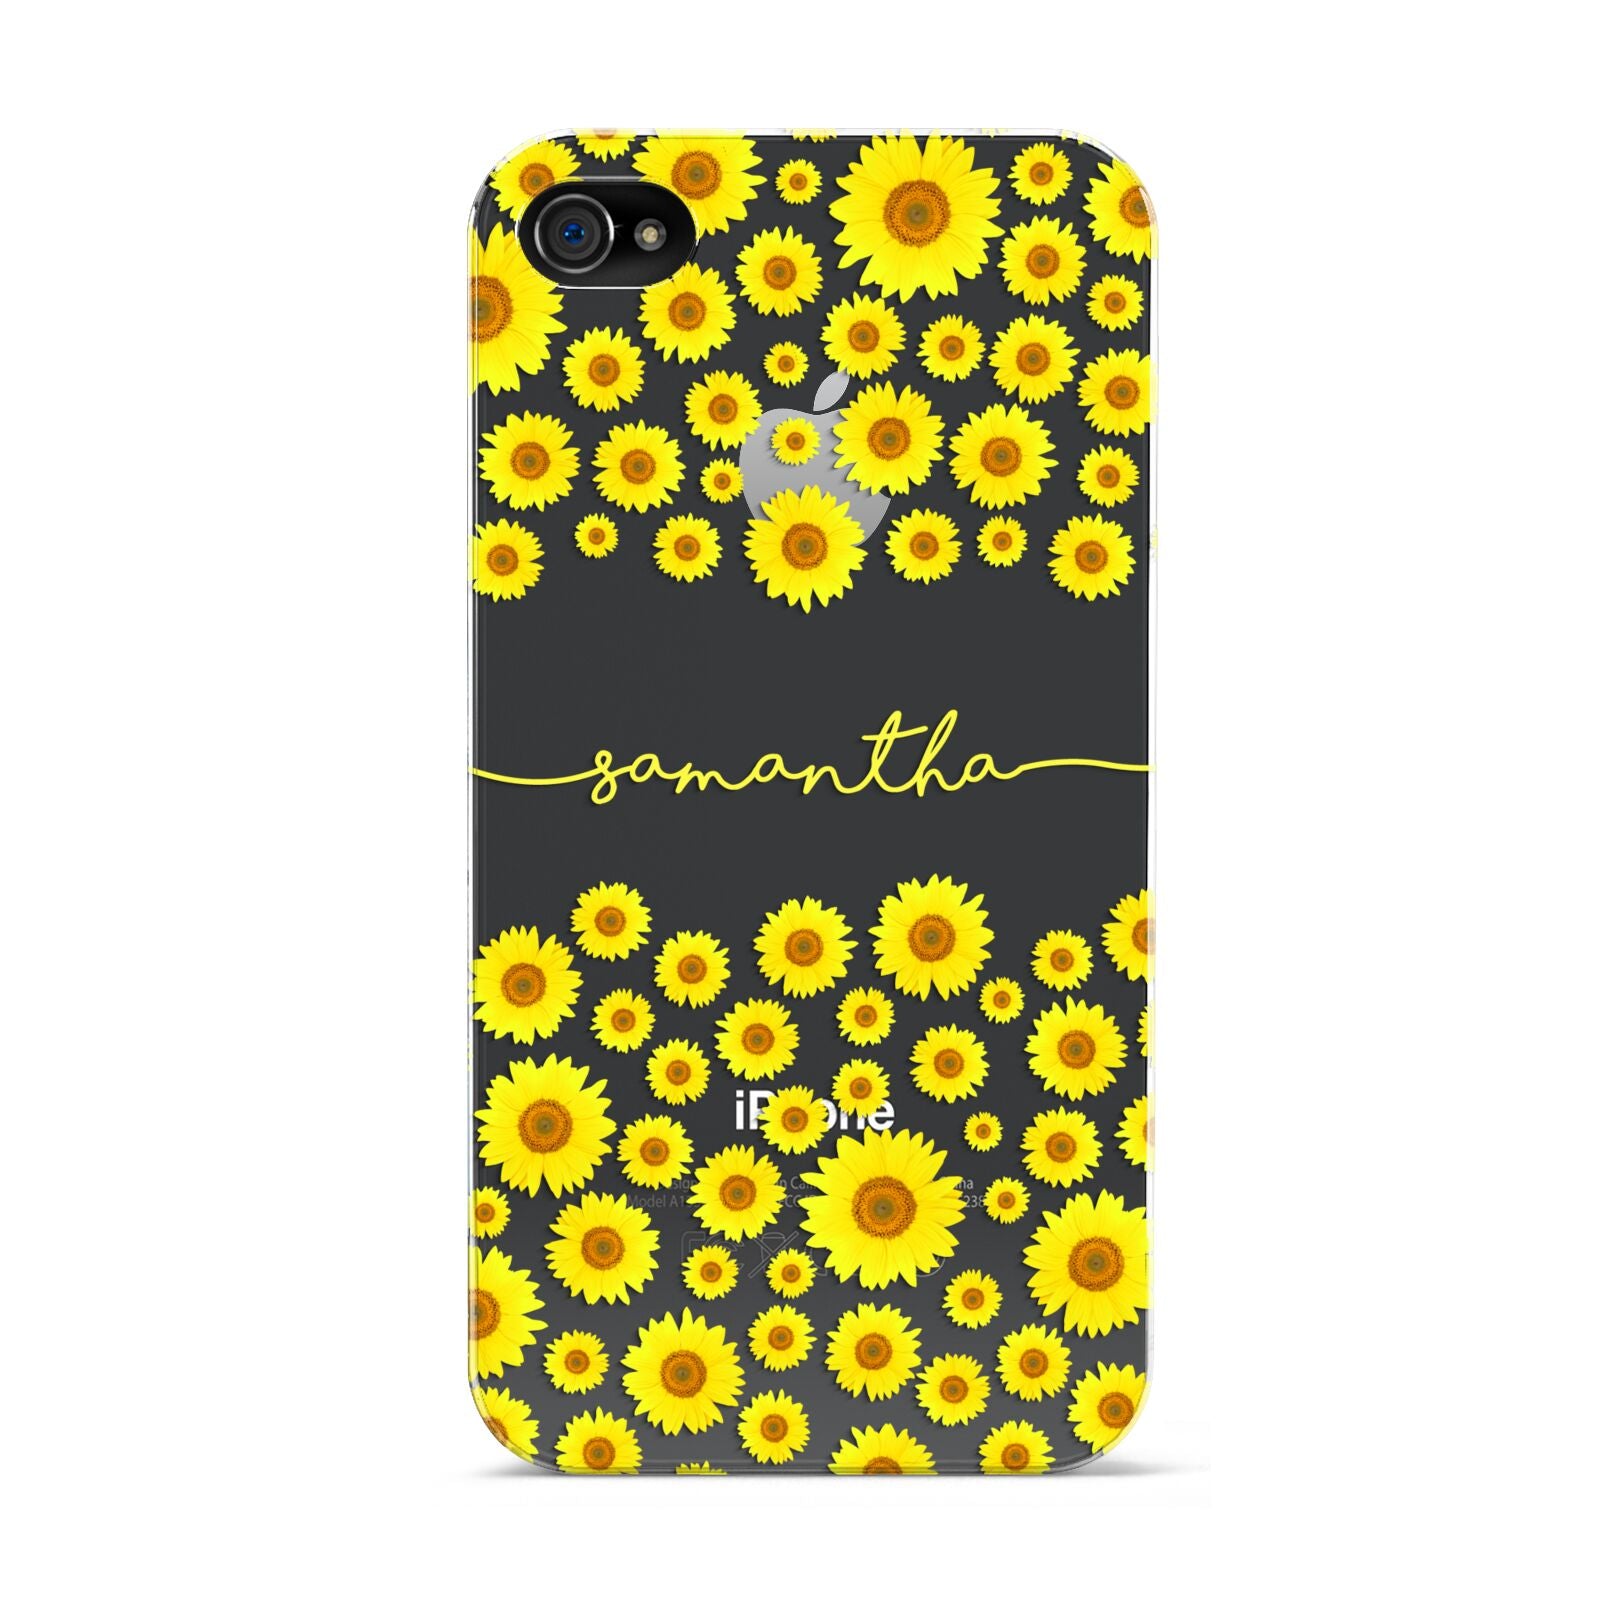 Personalised Sunflower Apple iPhone 4s Case